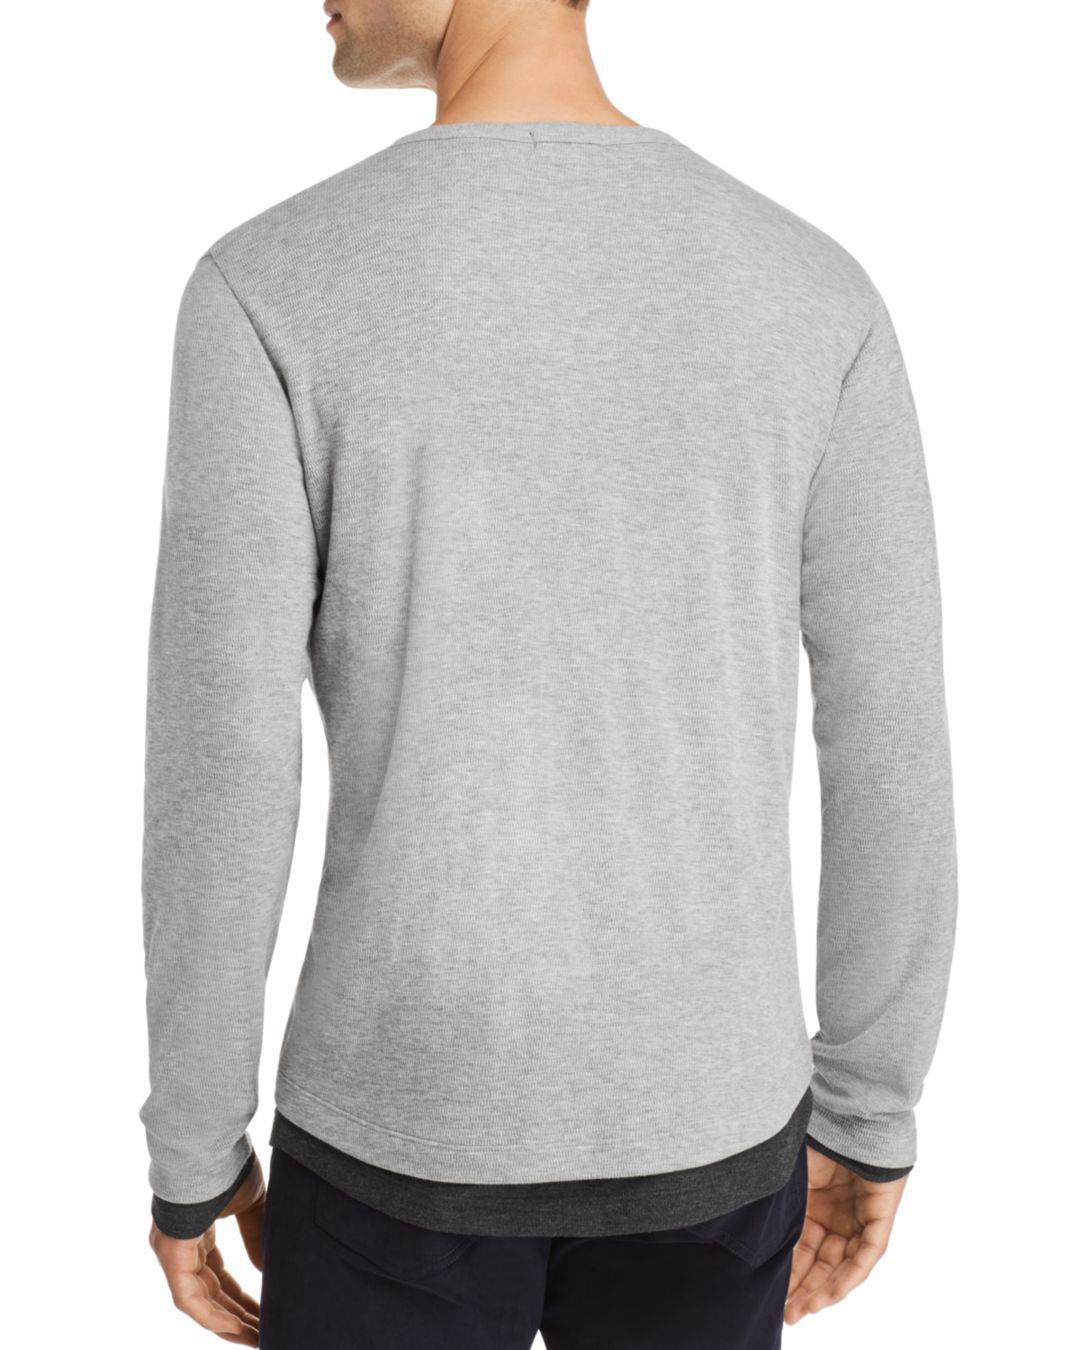 Theory Double Layer Henley in Heather Grey (Gray) for Men - Lyst